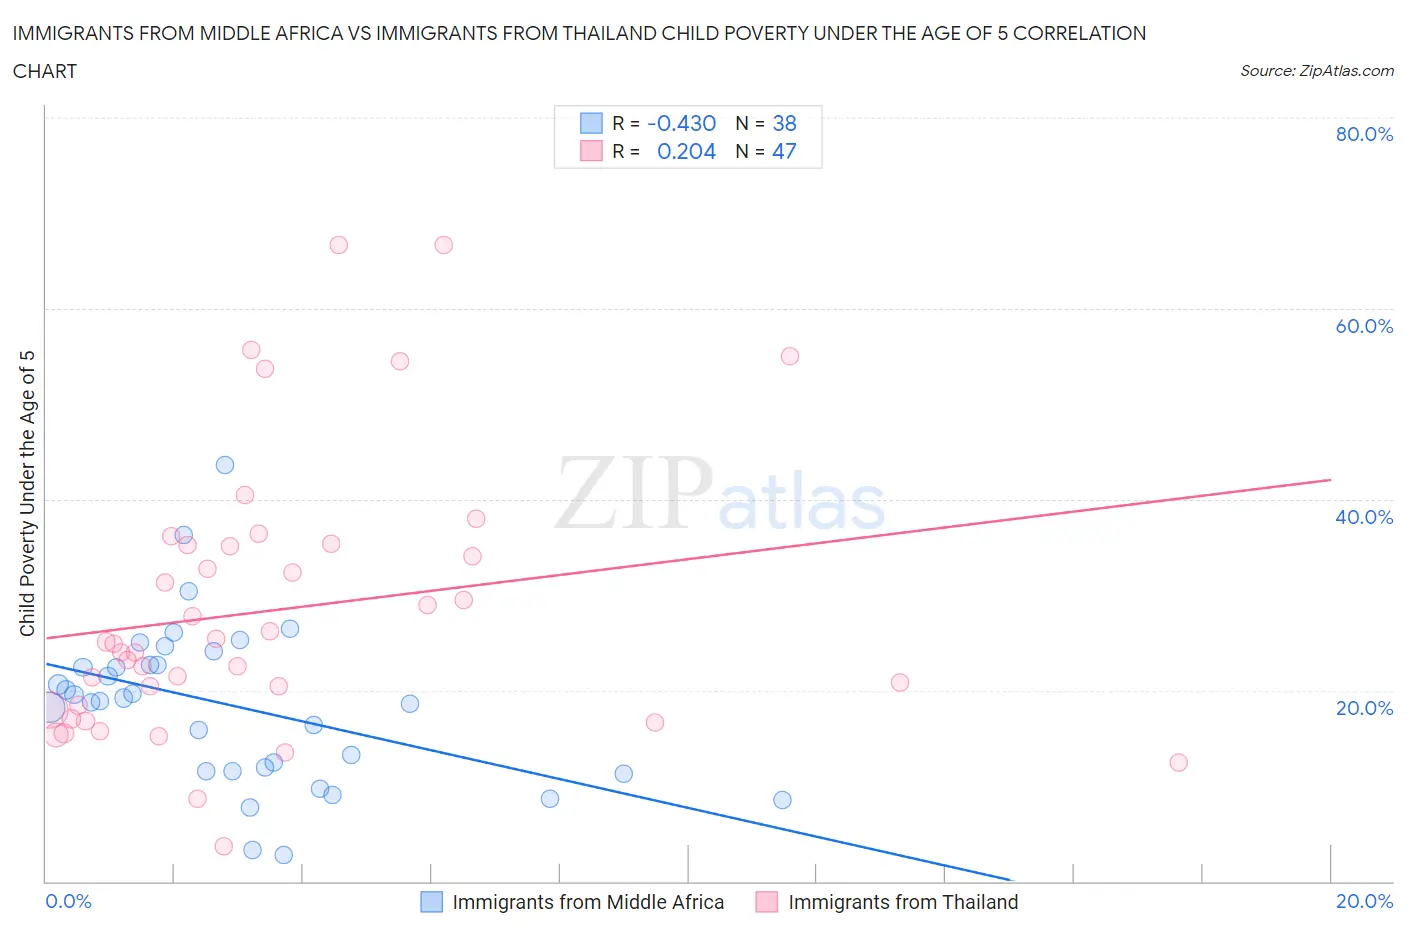 Immigrants from Middle Africa vs Immigrants from Thailand Child Poverty Under the Age of 5